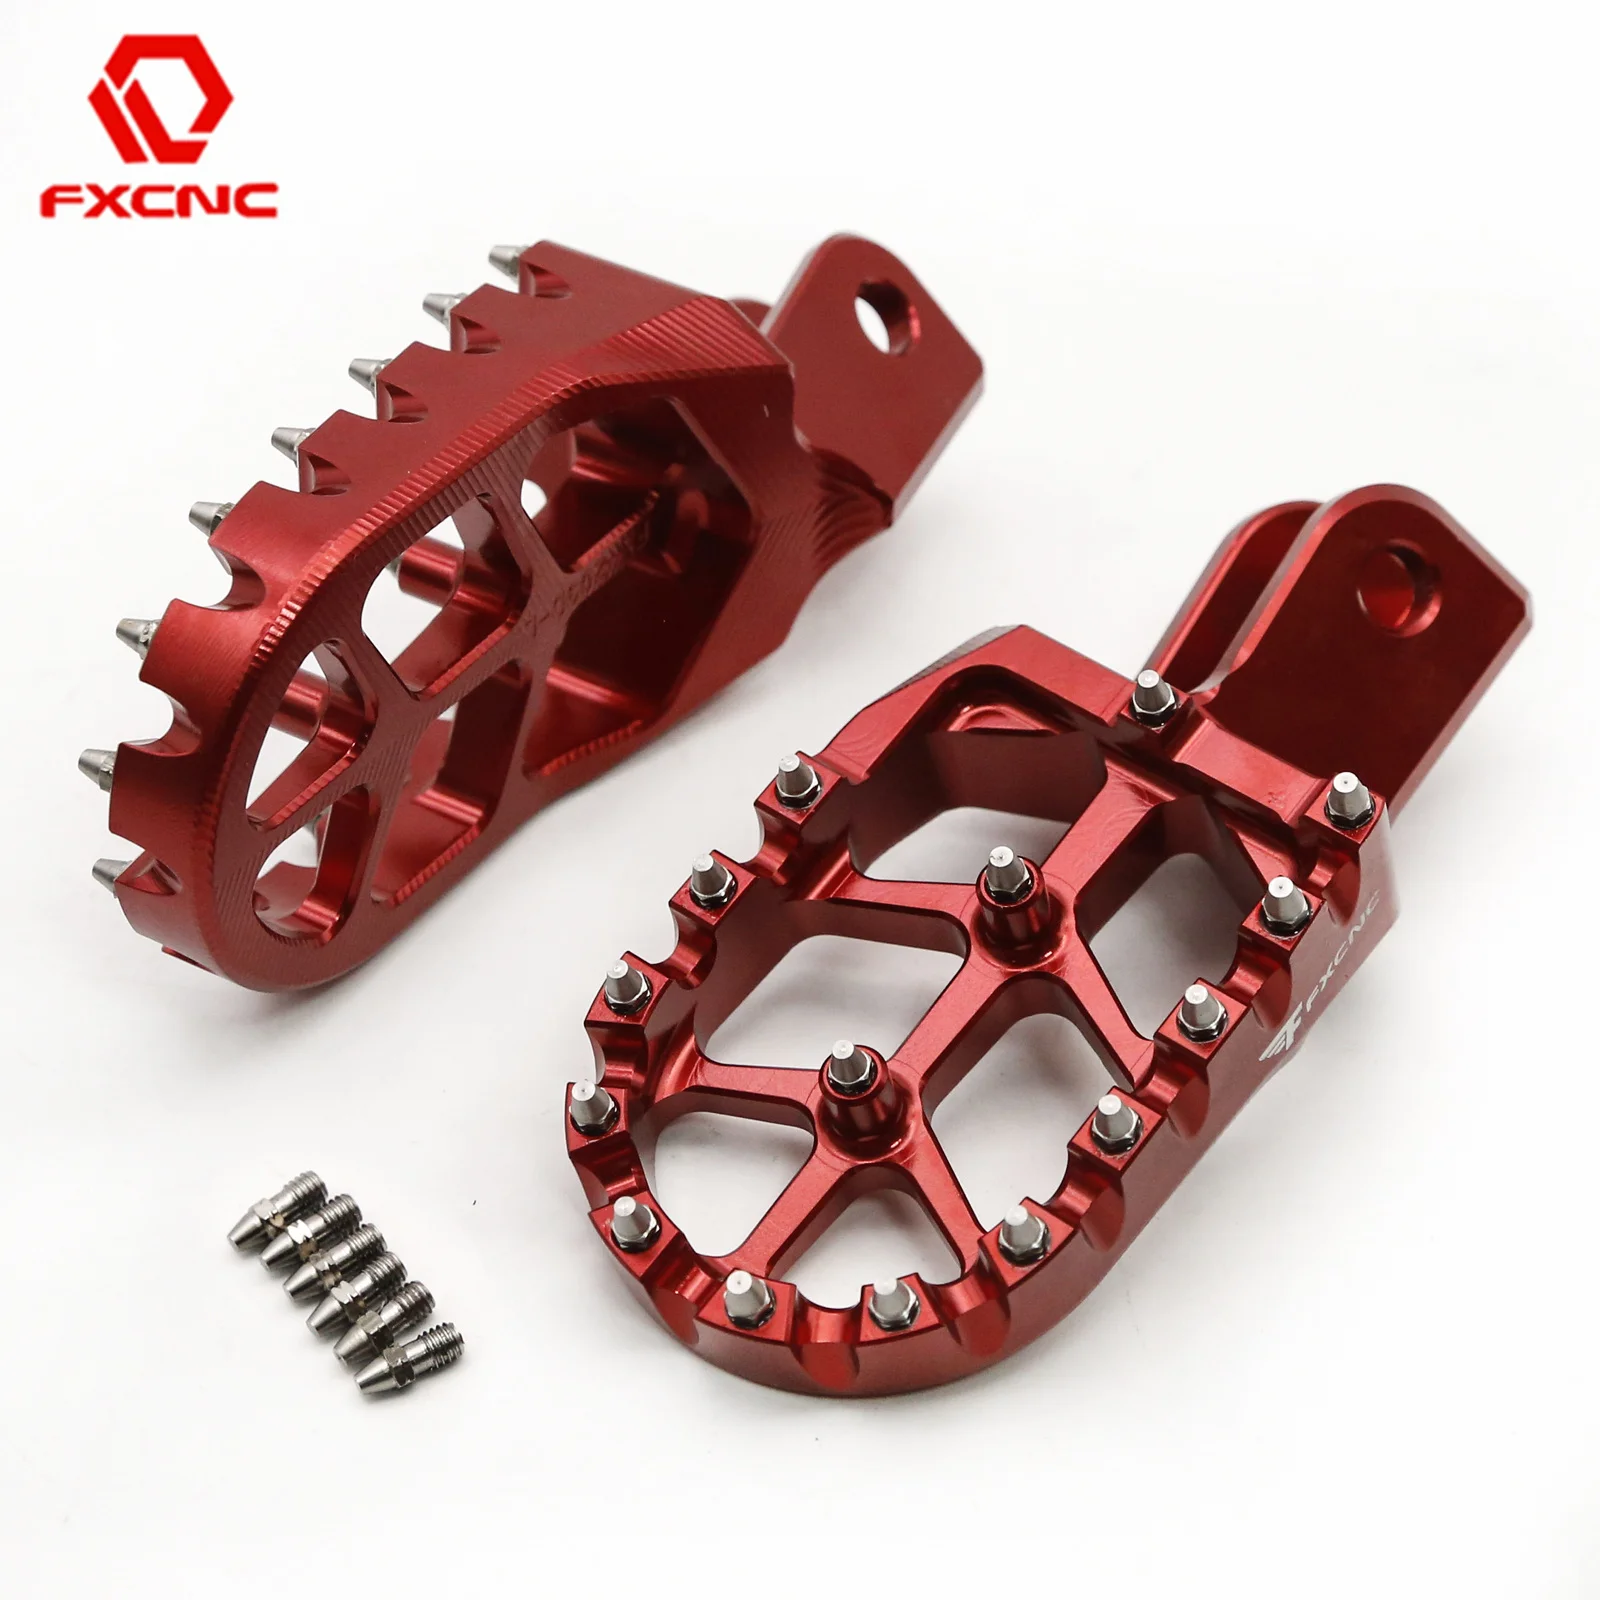 

For HONDA CRF150F CRF230F CRF 150 230 F CRF230 CRF150 F 2003-2019 2014 2015 2016 2017 2018 CNC Footpeg Foot Pegs Pedal Footrest